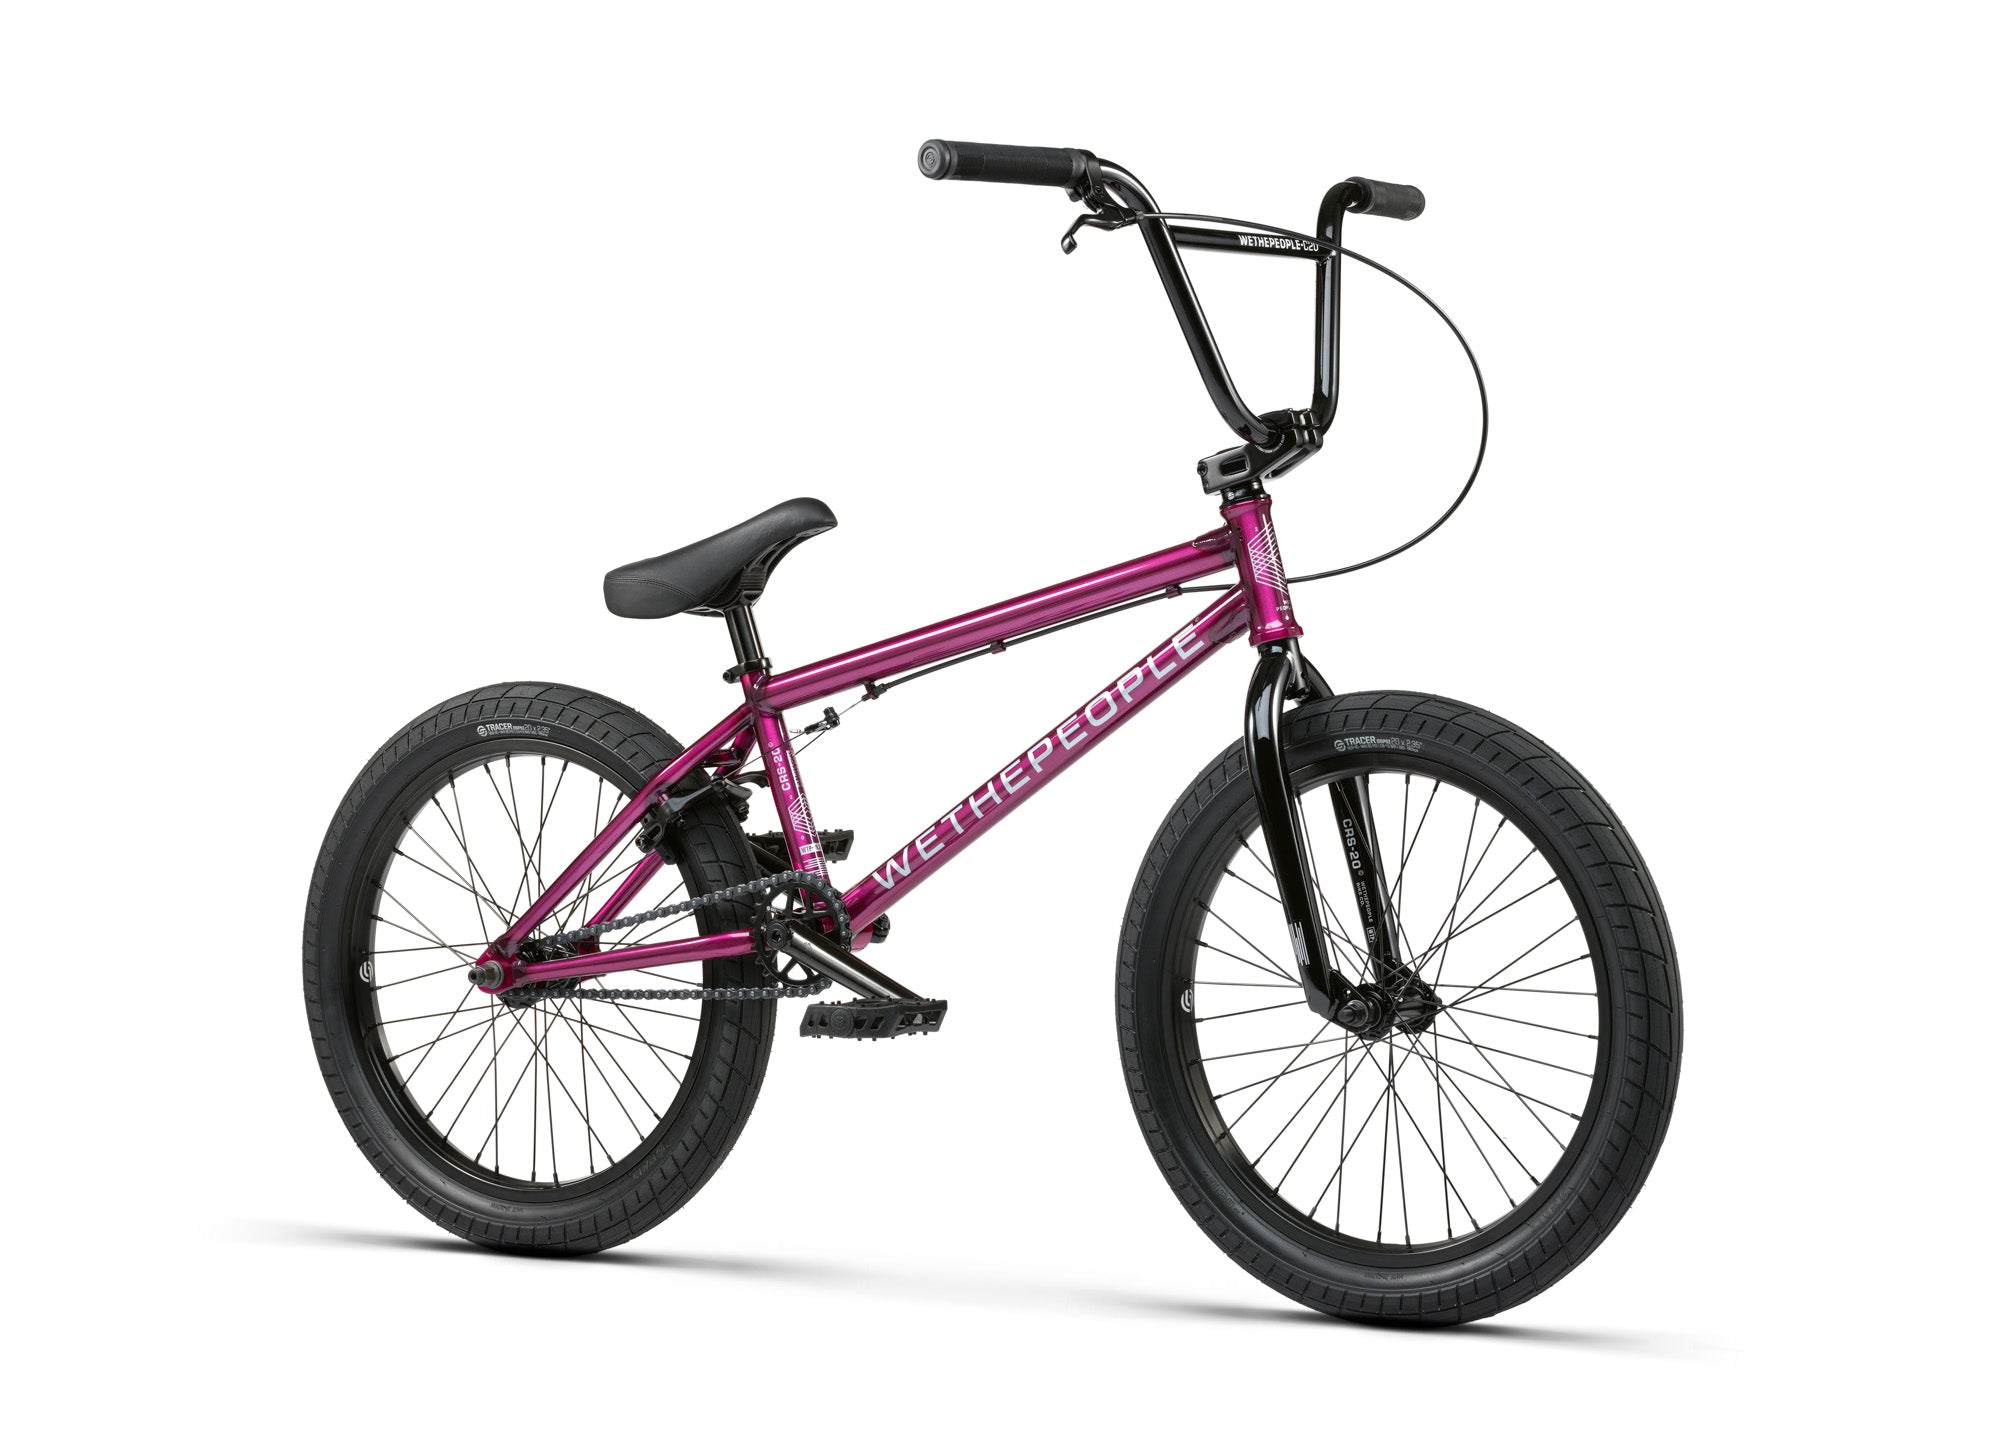 WeThePeople 20" CRS Freecoaster BMX Bike Side View